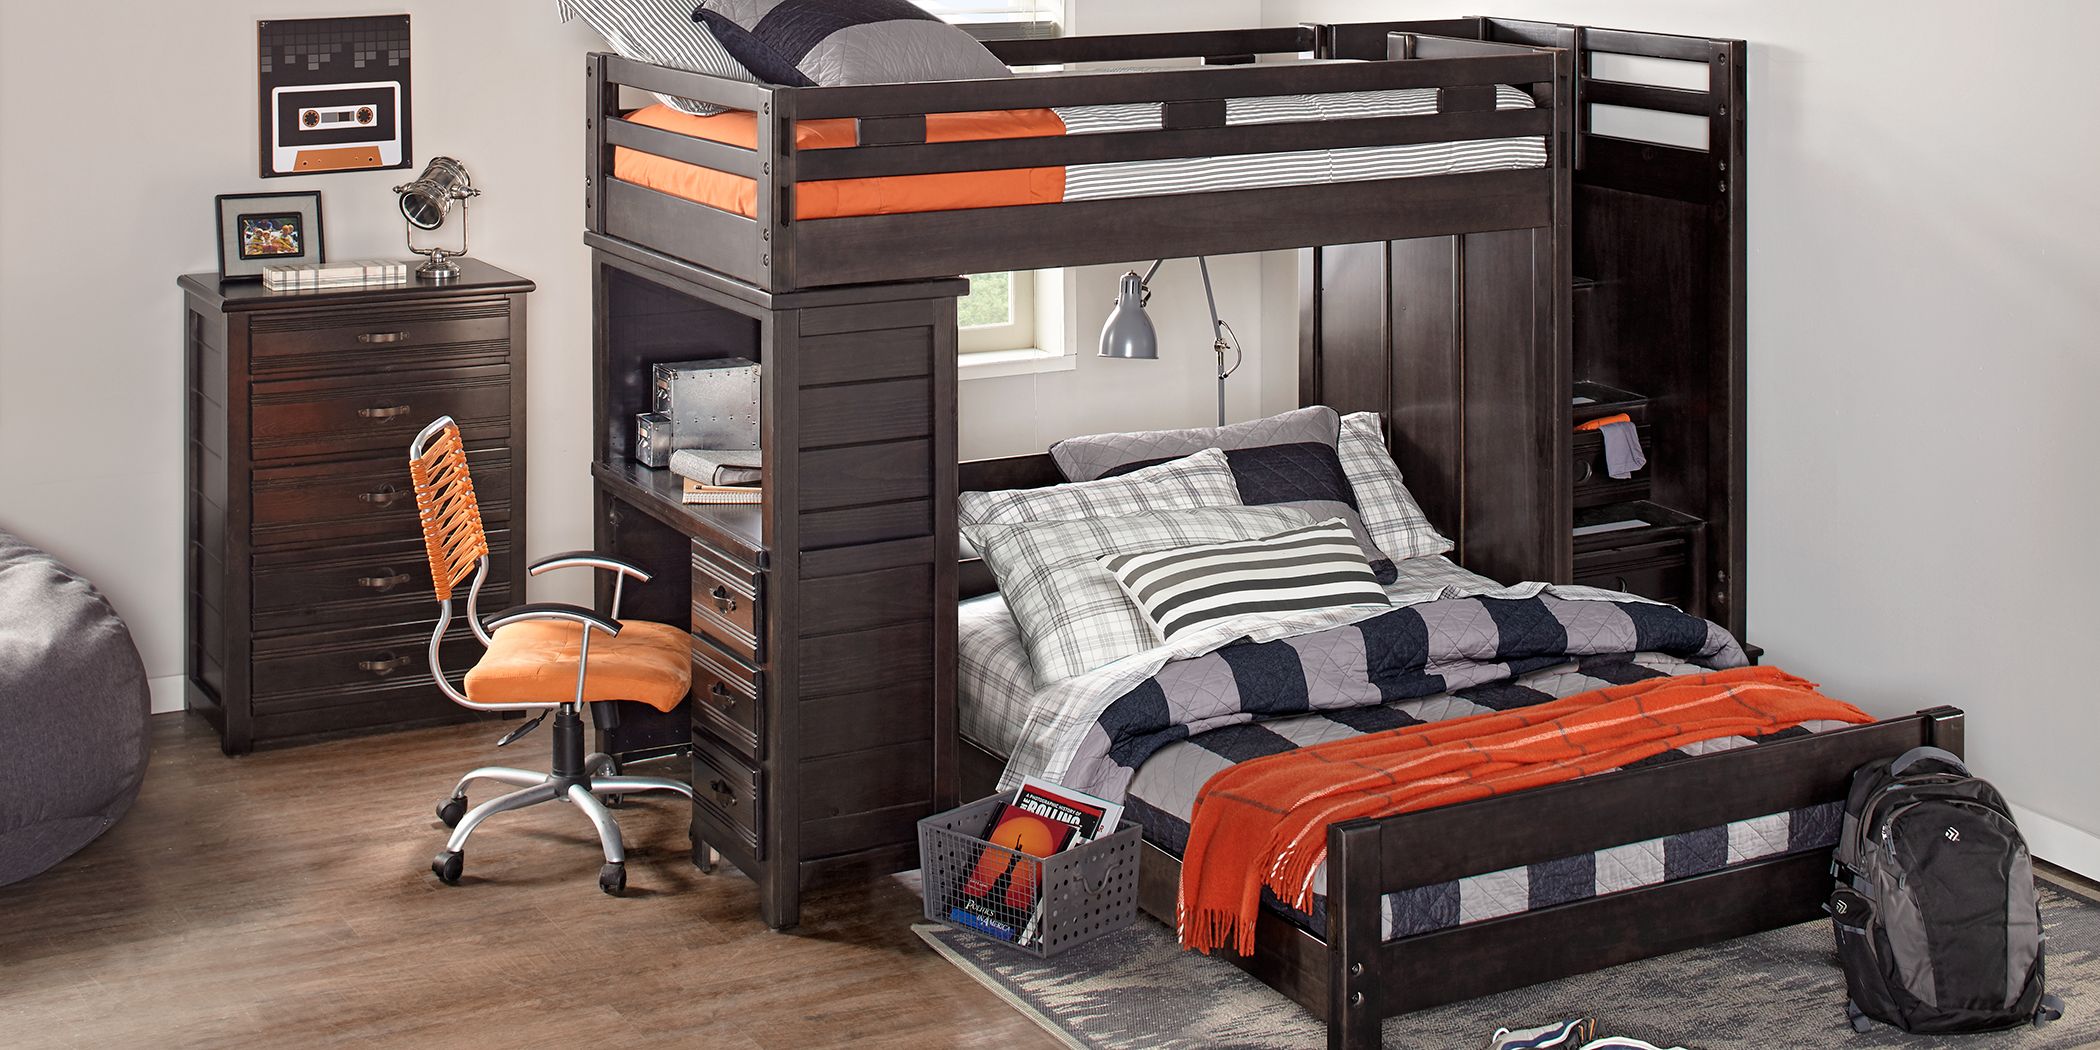 Creekside Charcoal Twin Full Step Bunk, Rooms To Go Bunk Beds